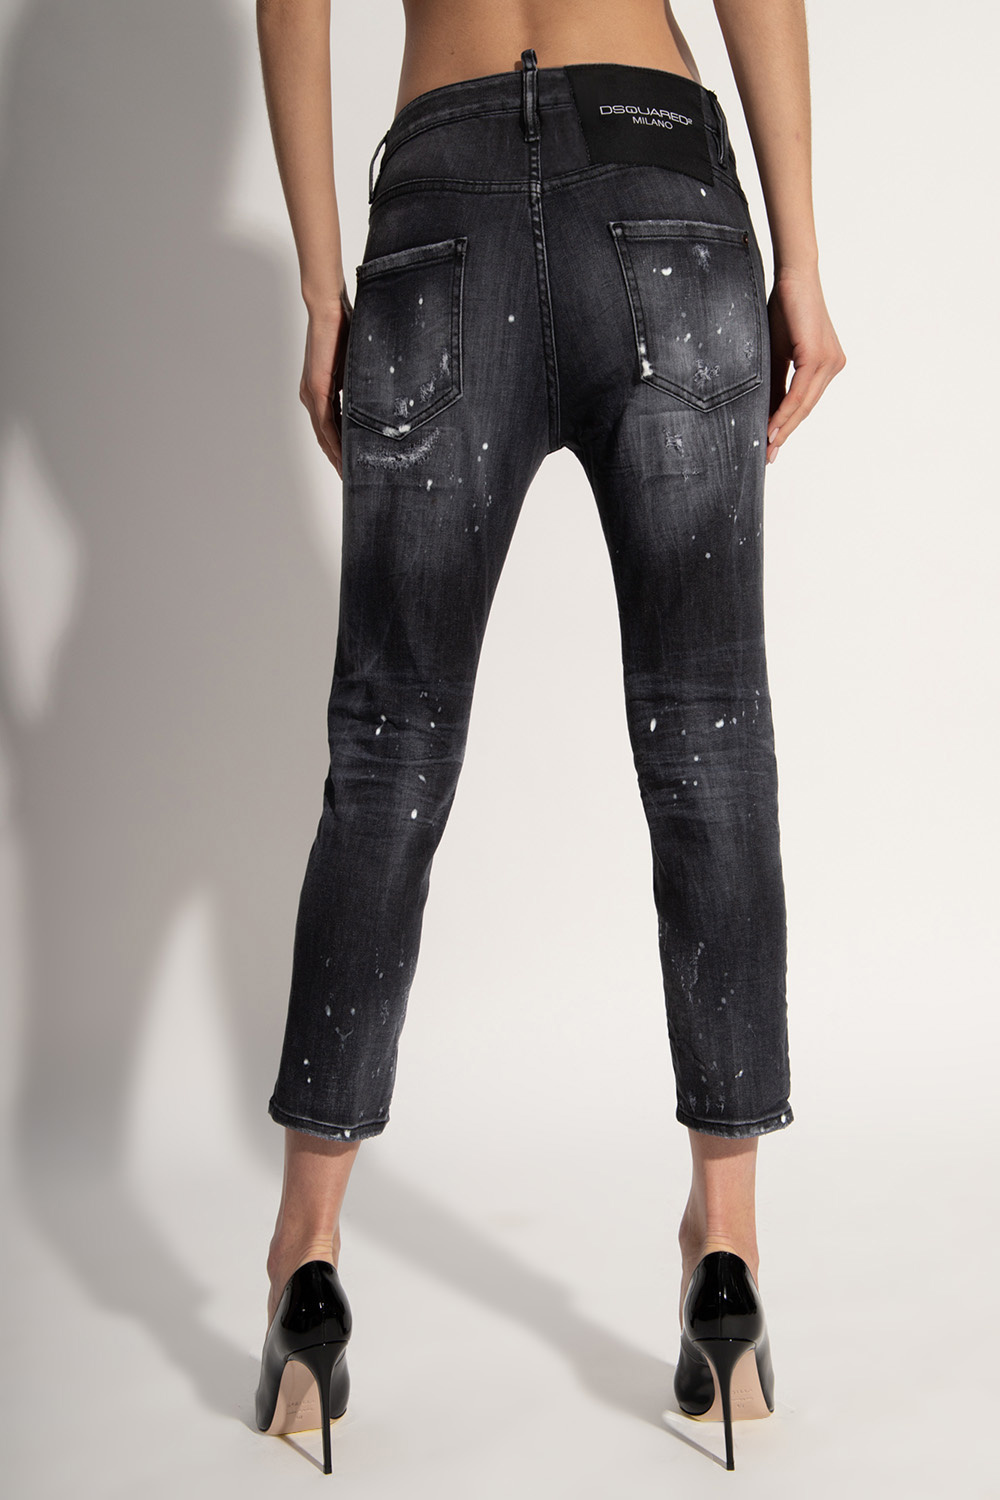 Dsquared2 'Cool Girl Cropped' jeans | Women's Clothing | Gucci GG